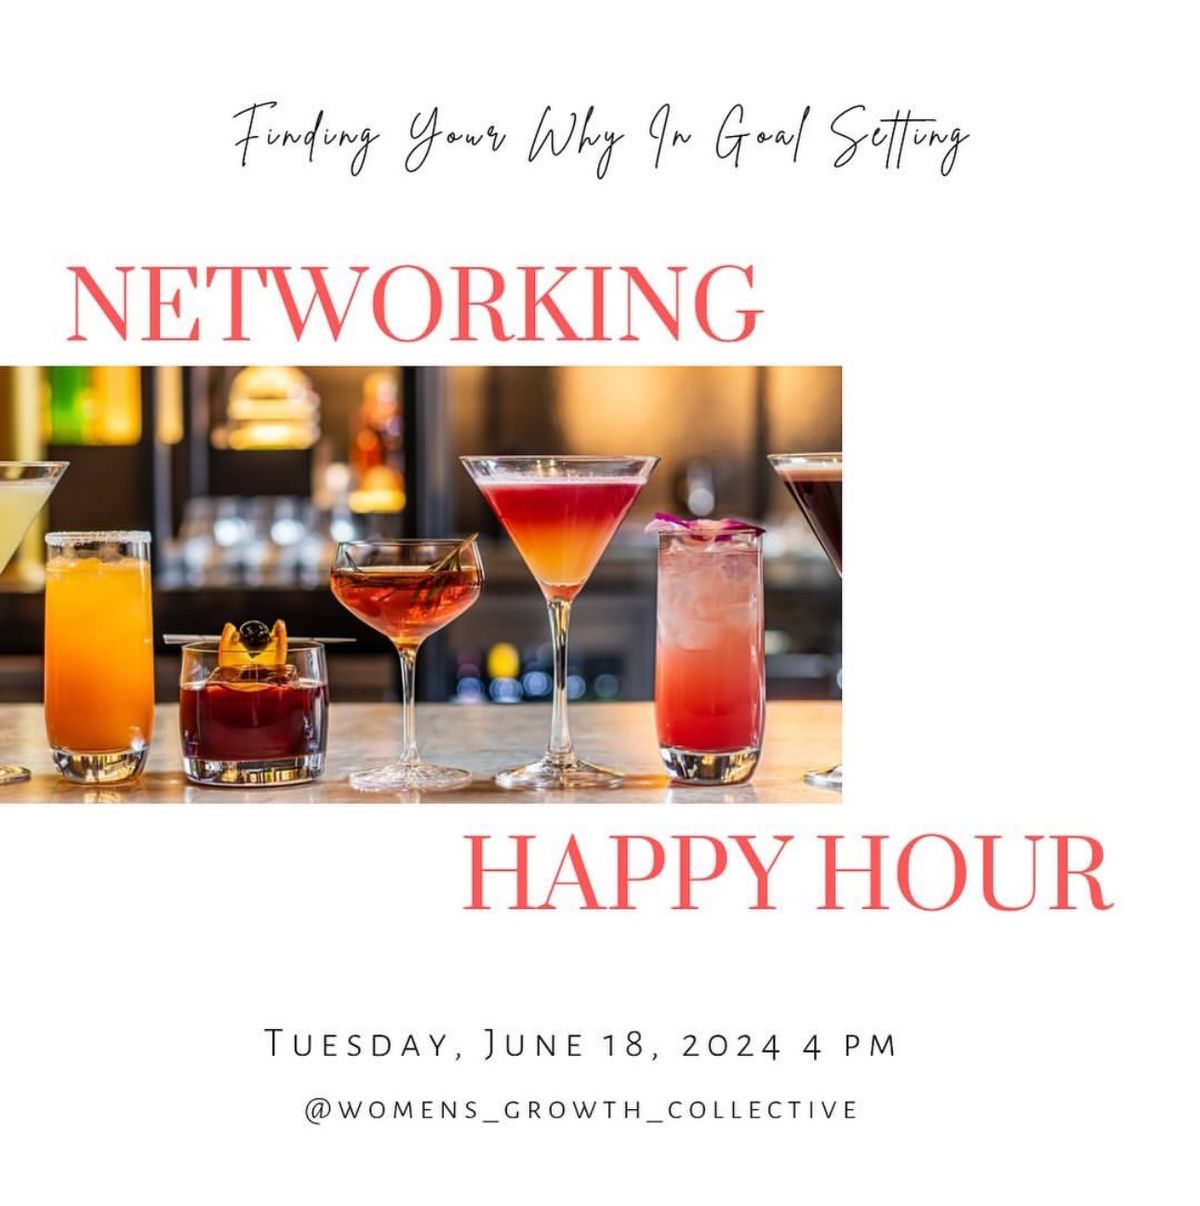 Happy Hour: Networking & \u201cFinding Your WHY in Goal Setting\u201d 